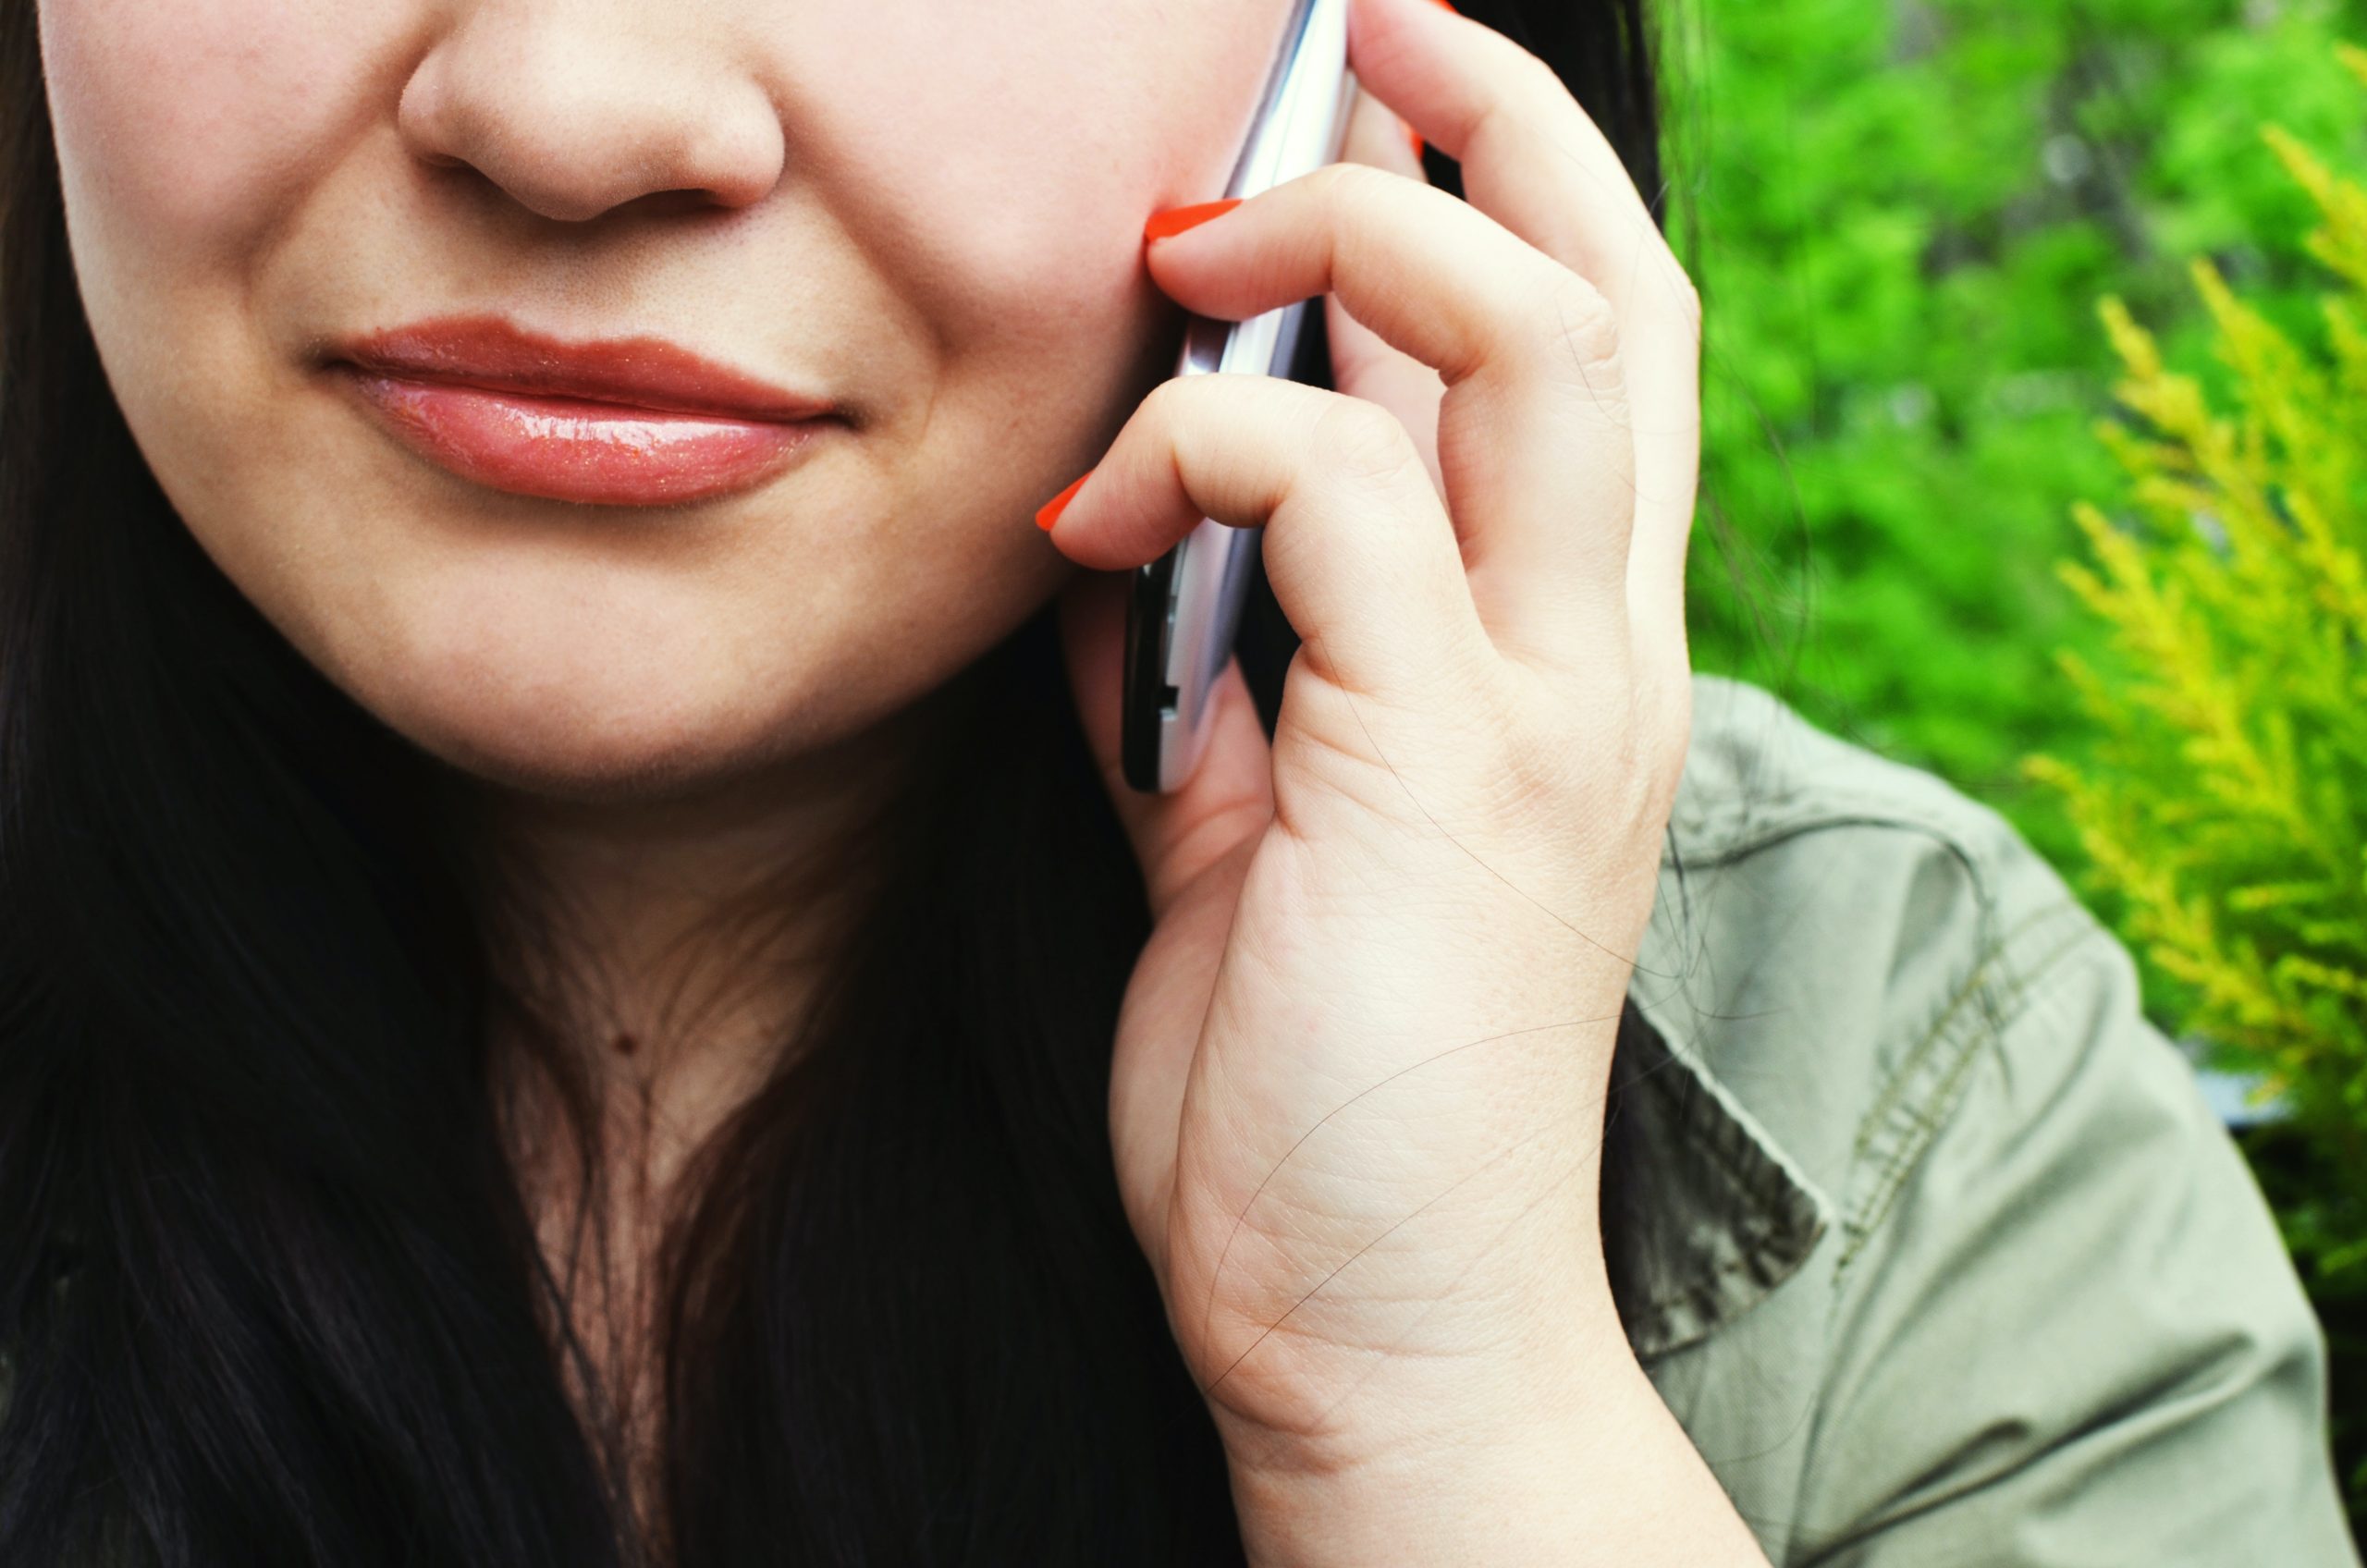 Considerations for Telephone Counselling